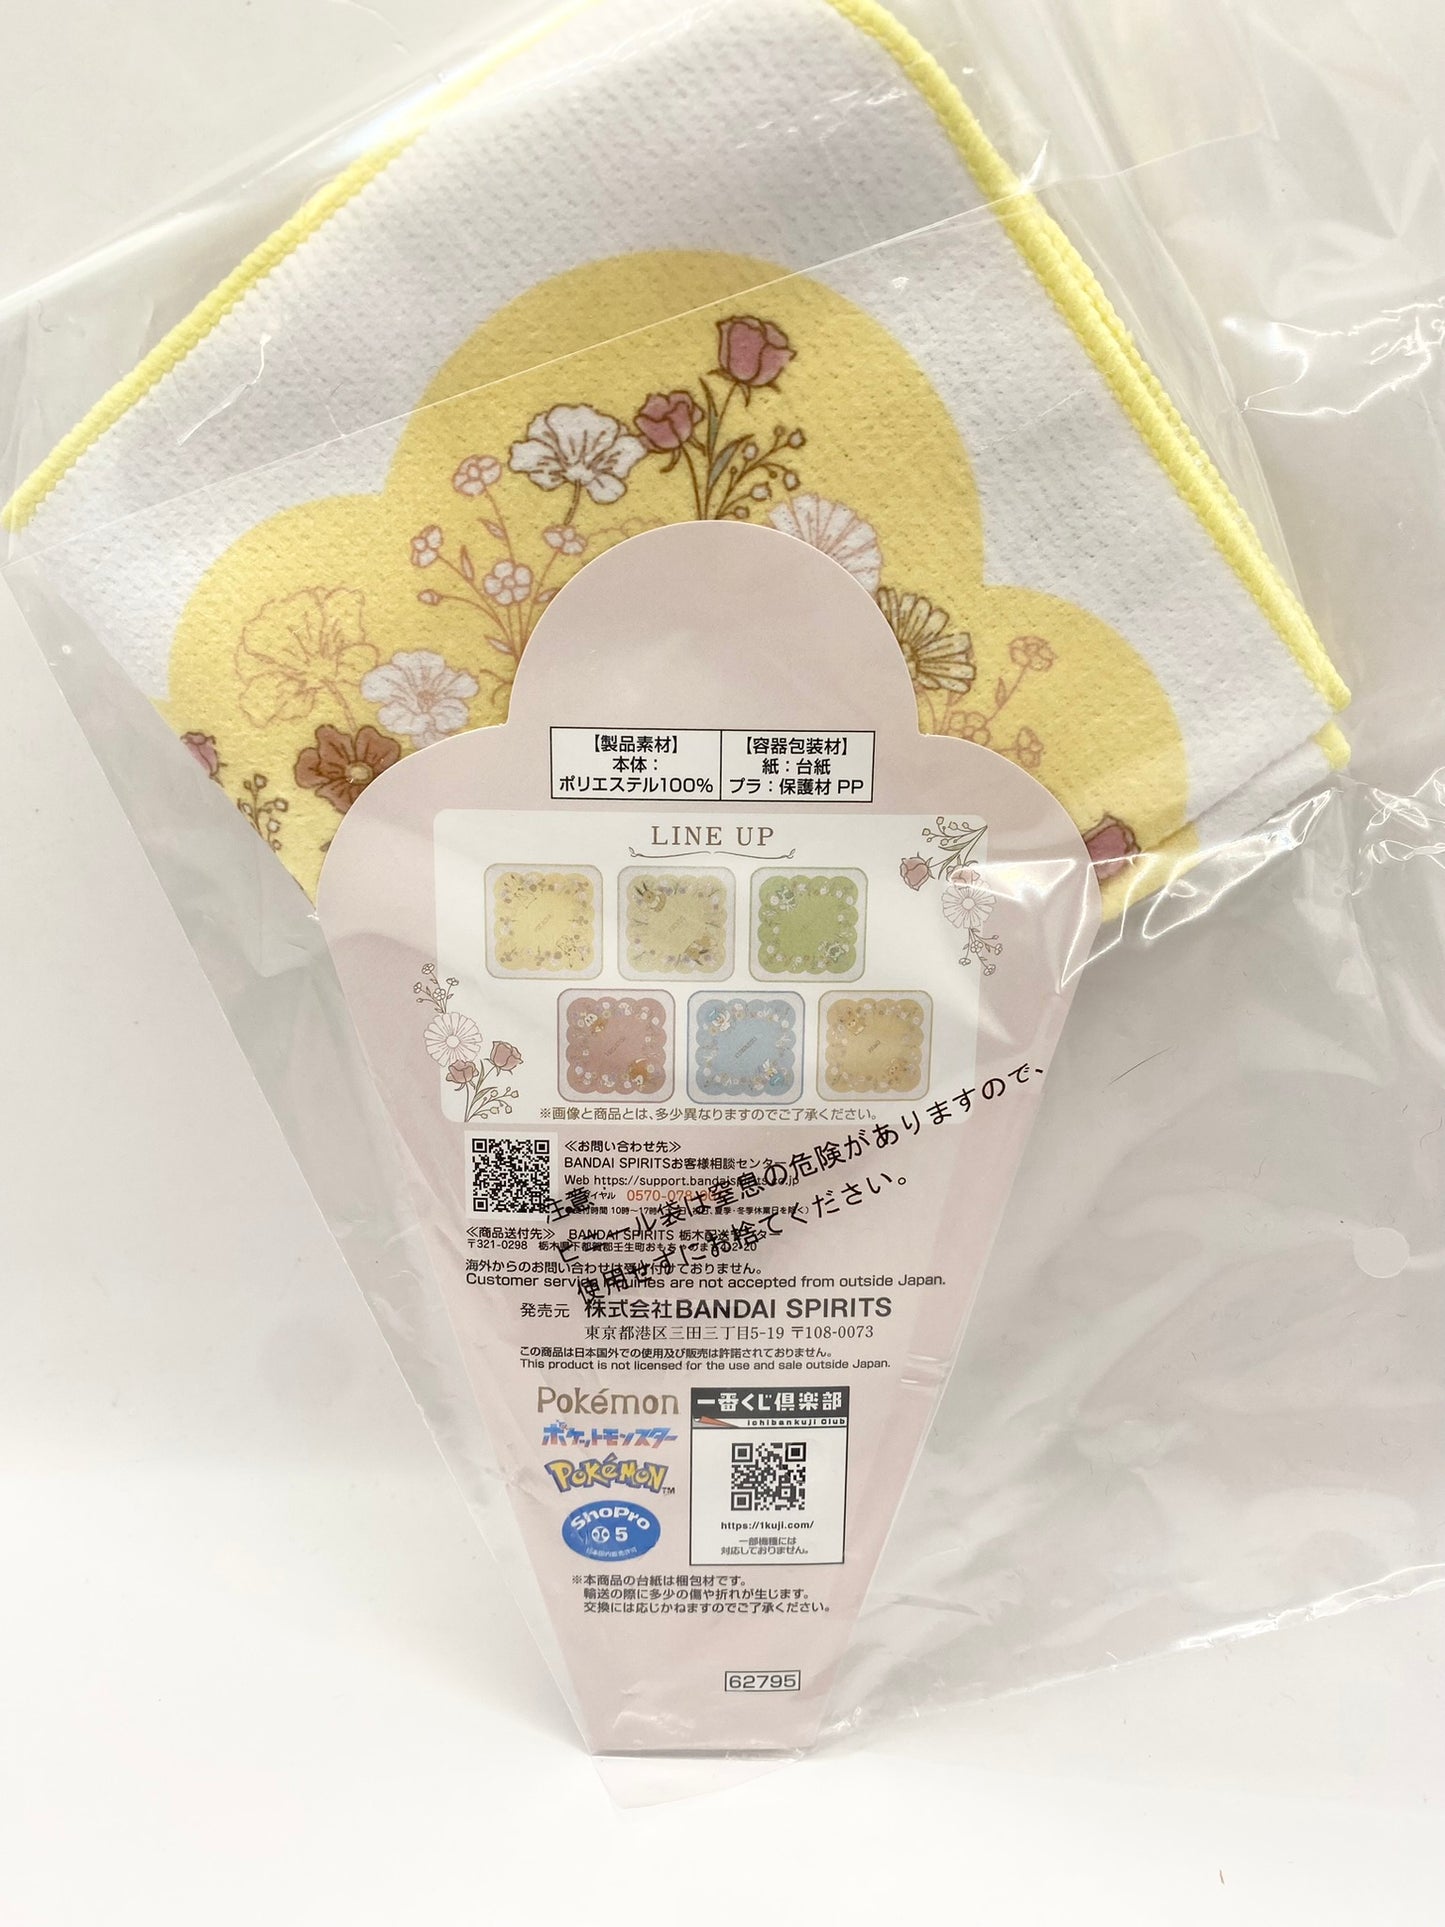 Pokémon Blooming Days Bandai Face Towel / Flannel